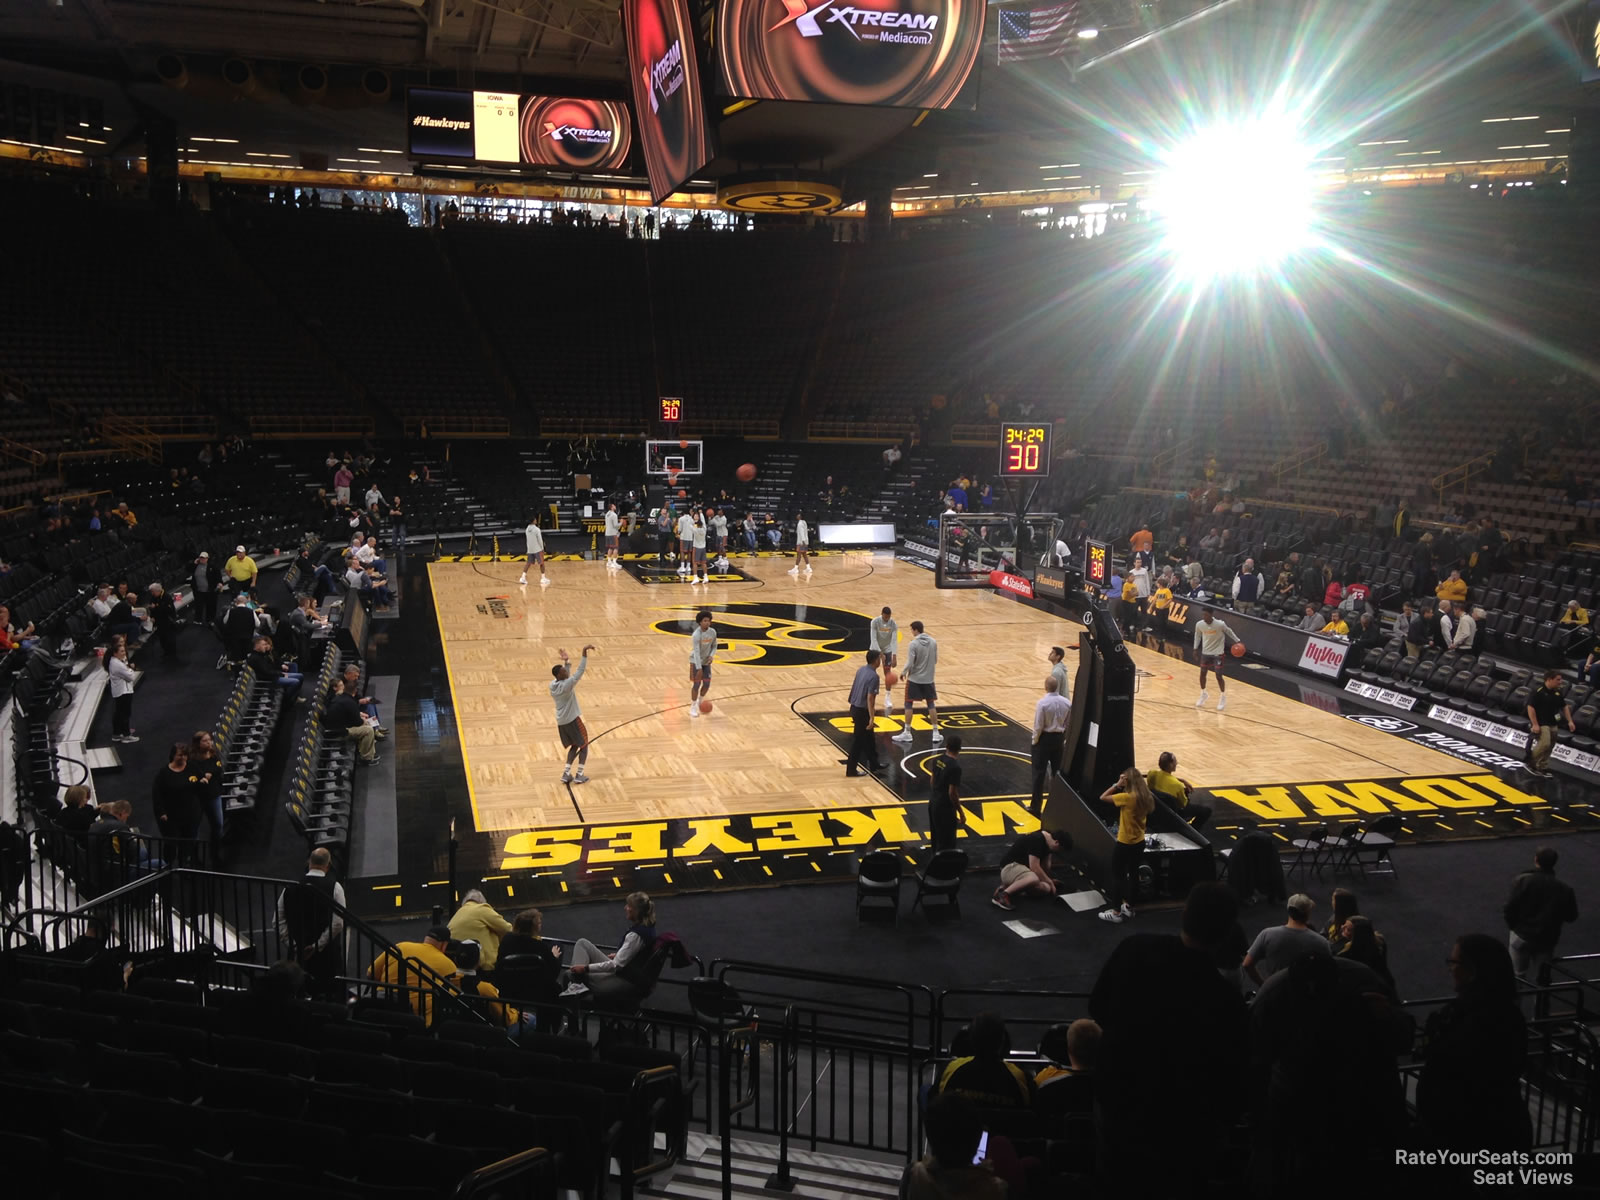 section hh, row 15 seat view  - carver-hawkeye arena